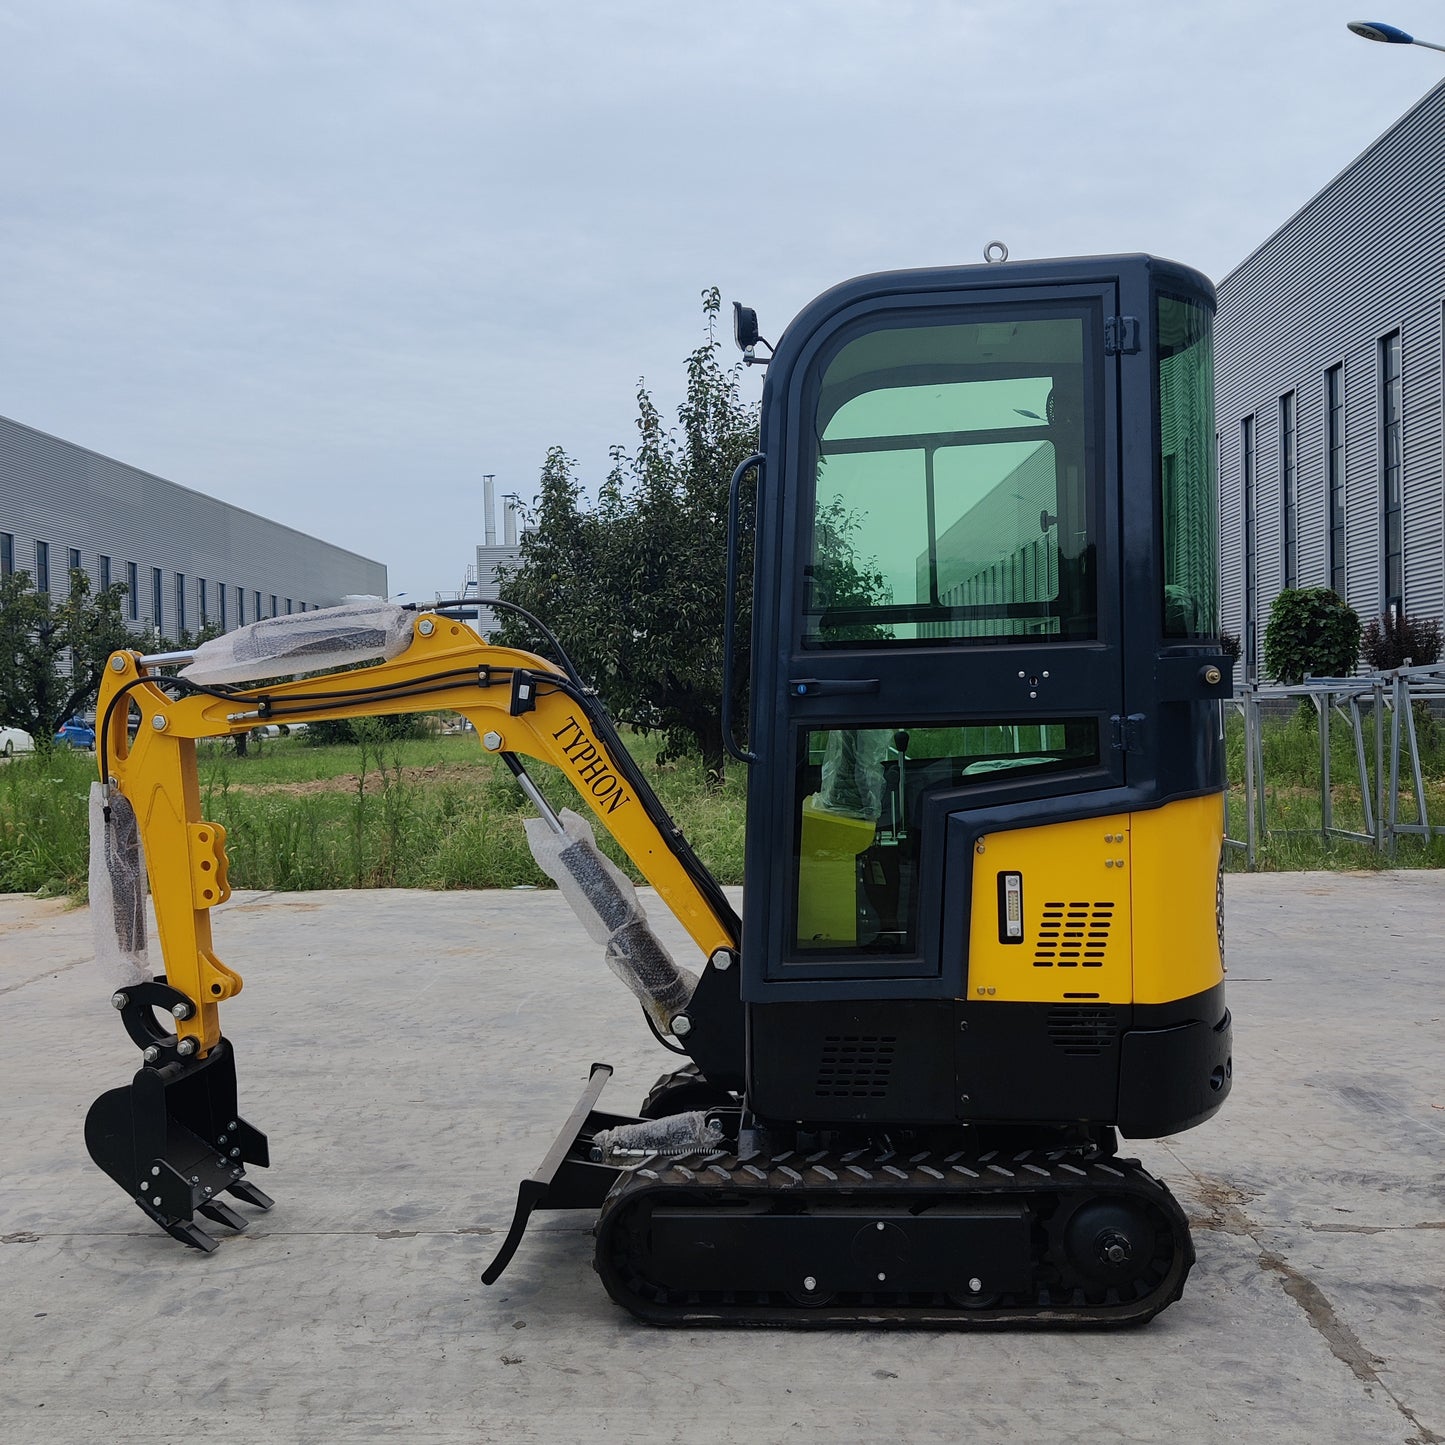 TYPHON Terror X Mini Excavator – 2,500lb Trench Digger with Cabin, 380mm Wide Bucket